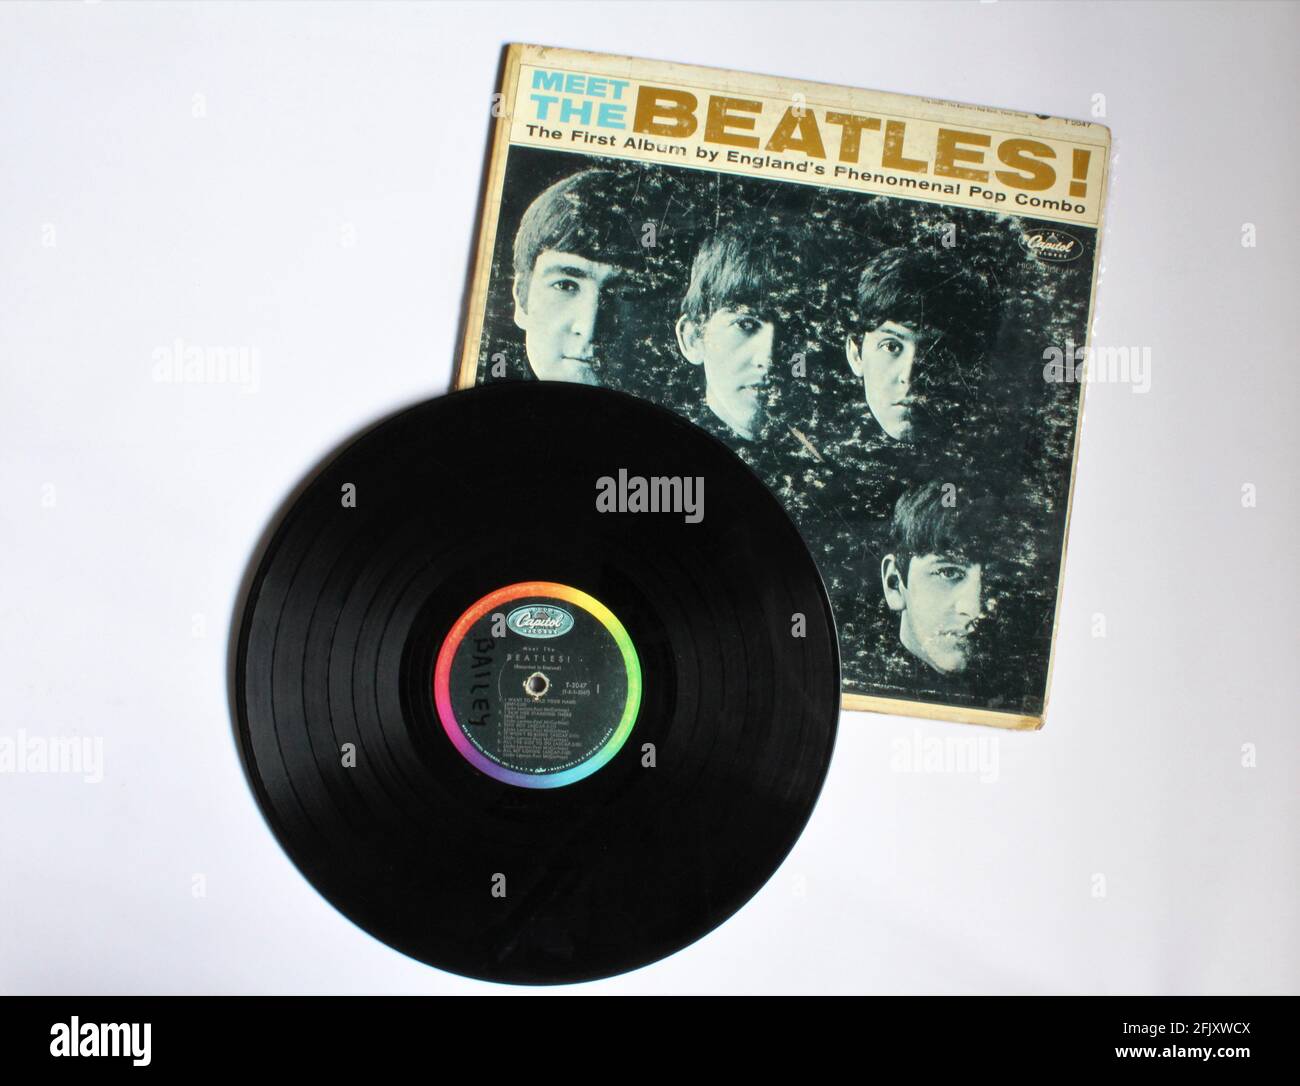 English rock band The Beatles music album on vinyl record LP Titled Meet  the Beatles! Their first American Album with song I want to hold your hand  Stock Photo - Alamy